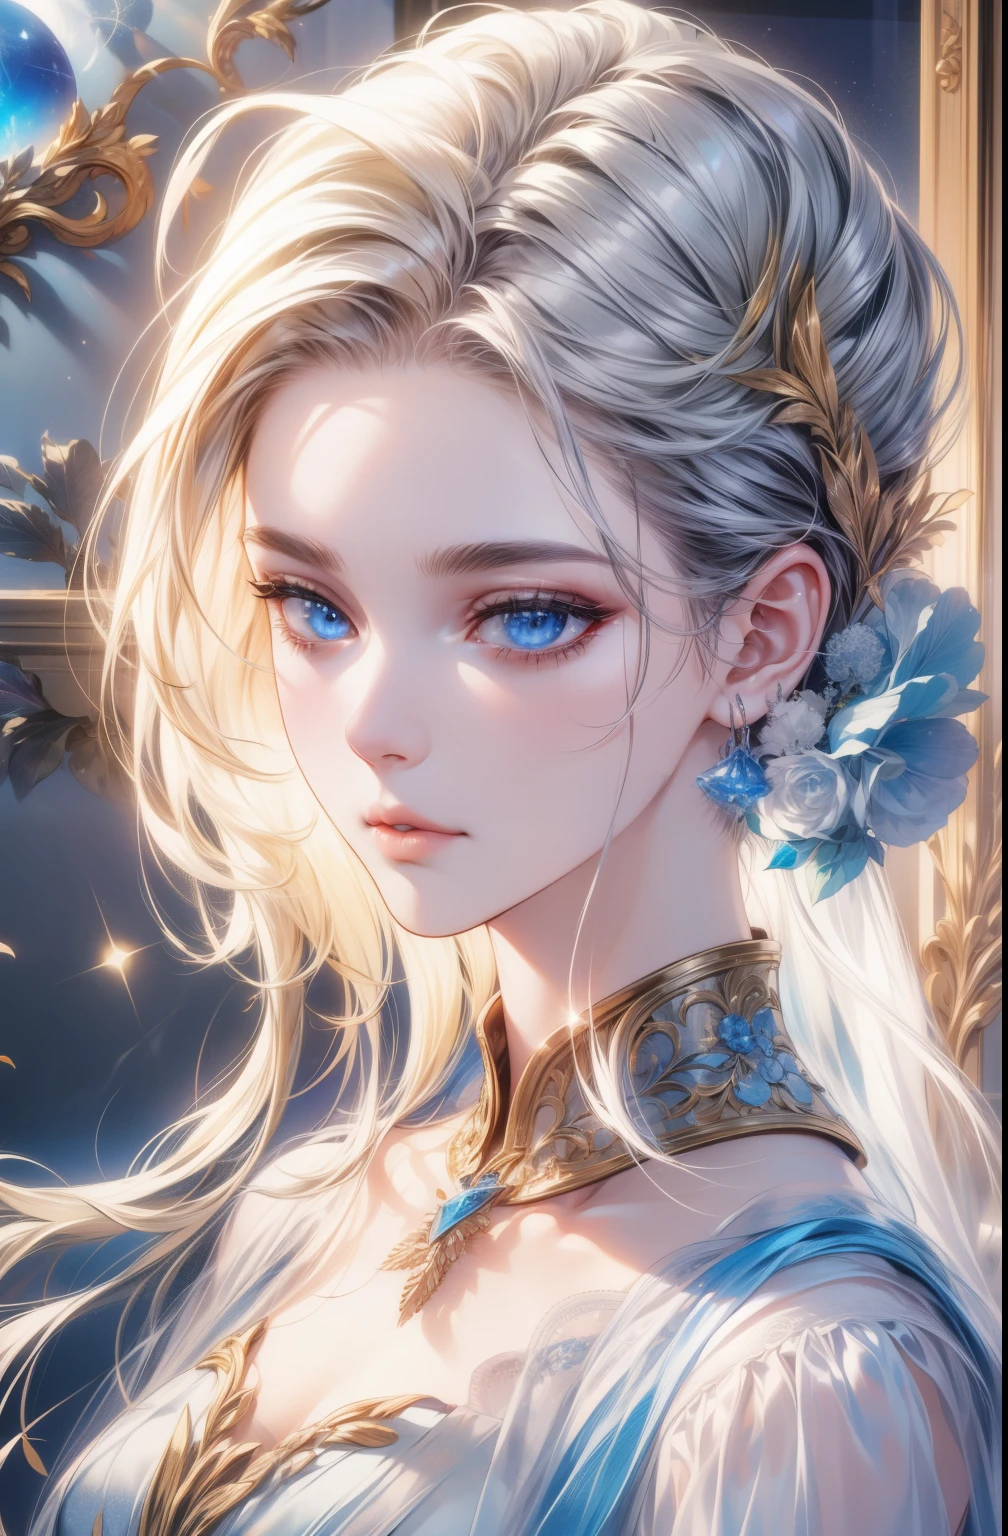 (best quality,highres,masterpiece:1.2),ultra-detailed,realistic:1.37,portrait,woman with silver hair,portrait in half-body,porcelain skin,detailed eyes with symmetrical left and right eyes,luminous sky blue eyes,luxurious golden hair accessory,mosaic pattern background,spotlight,high contrast,striking shadows,detailed shading,meticulously crafted masterpiece,top quality,top-notch image quality